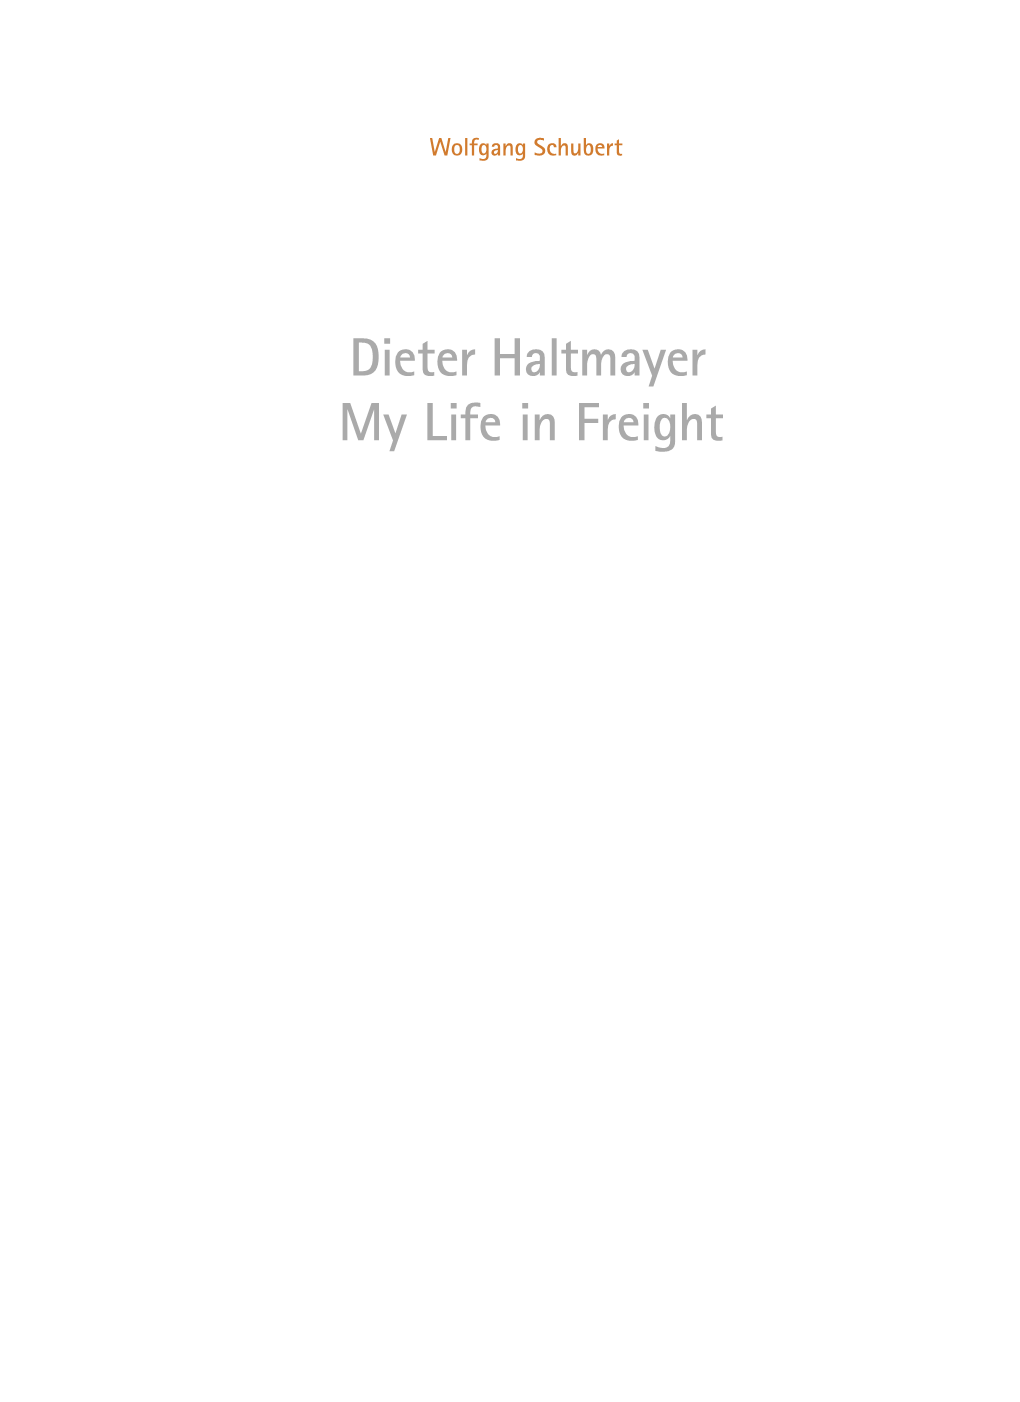 My Life in Freight by Dieter Haltmayer, CEO of QCS